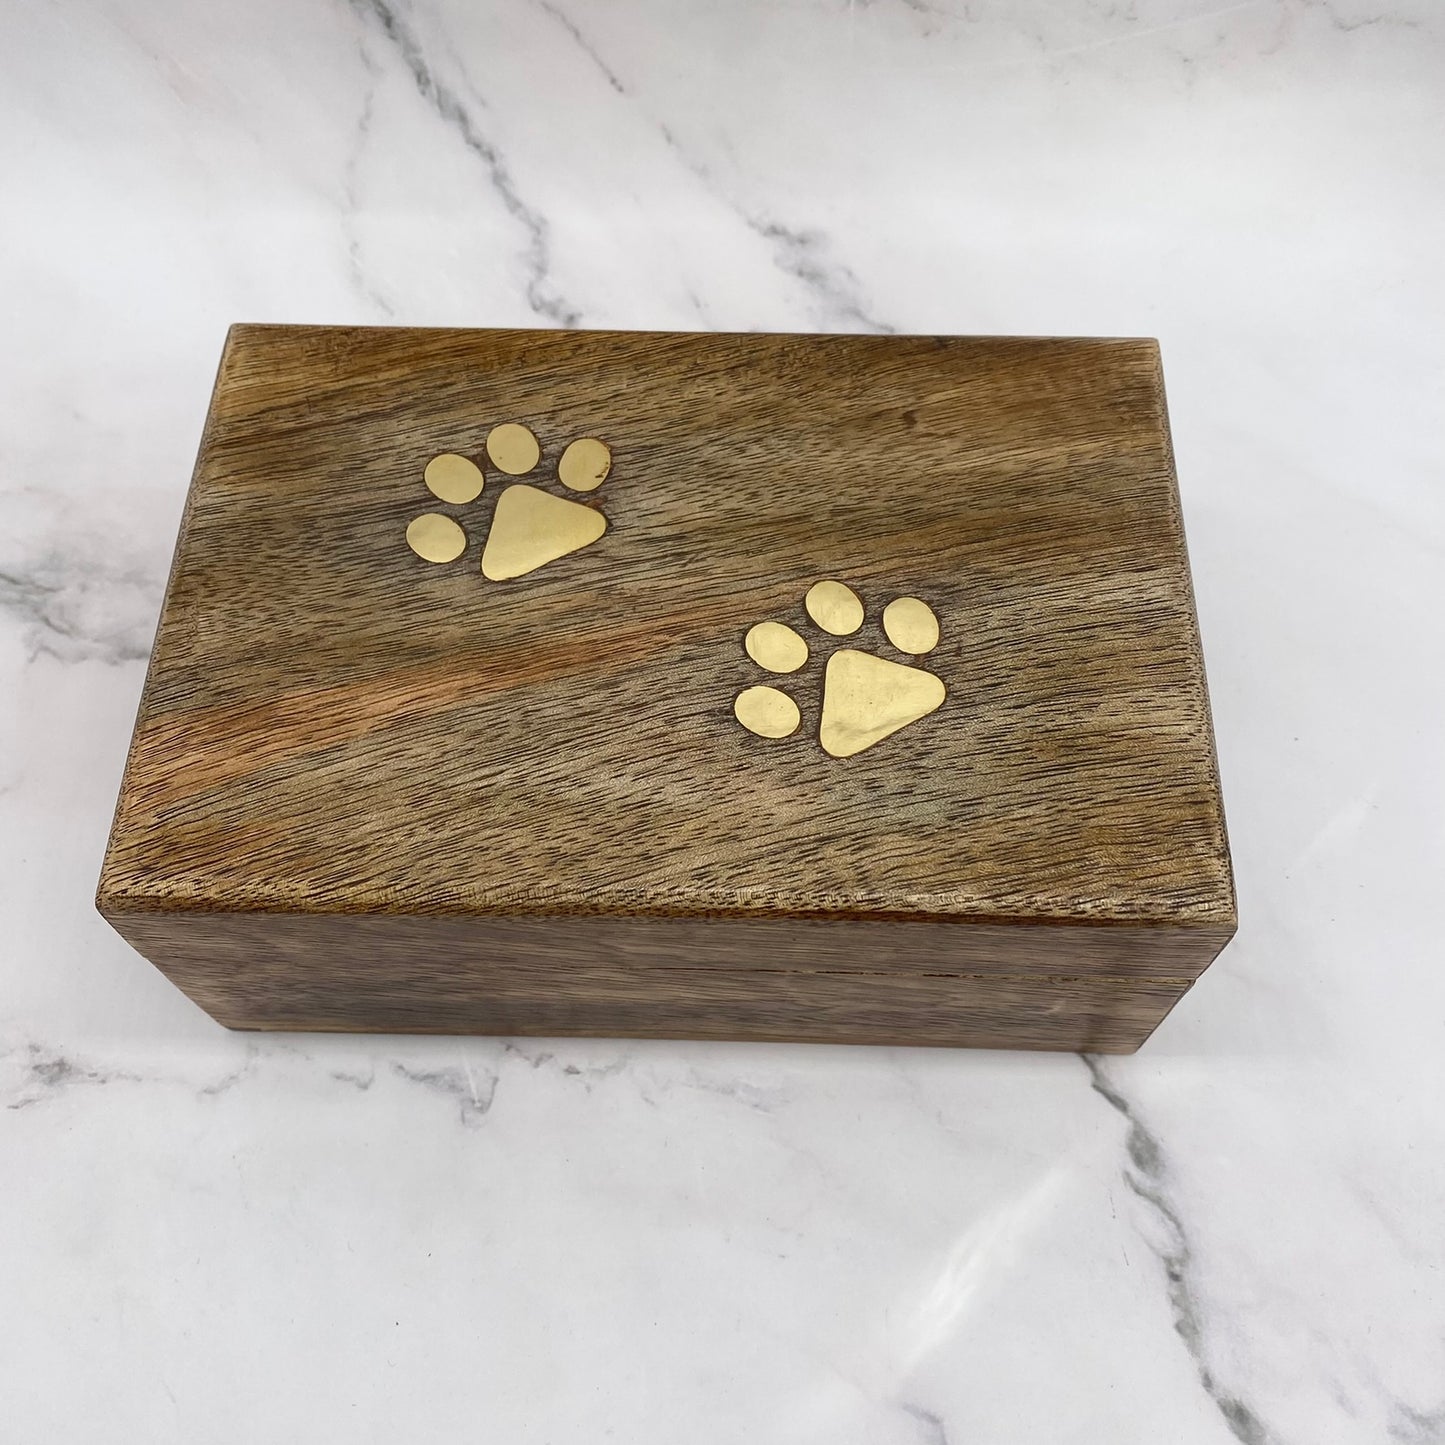 Handcarved Boxes, Wooden Storage Box, Paw Design Cute Jewelry Box, Tarot Boxes, Stash Boxes, Home Decor